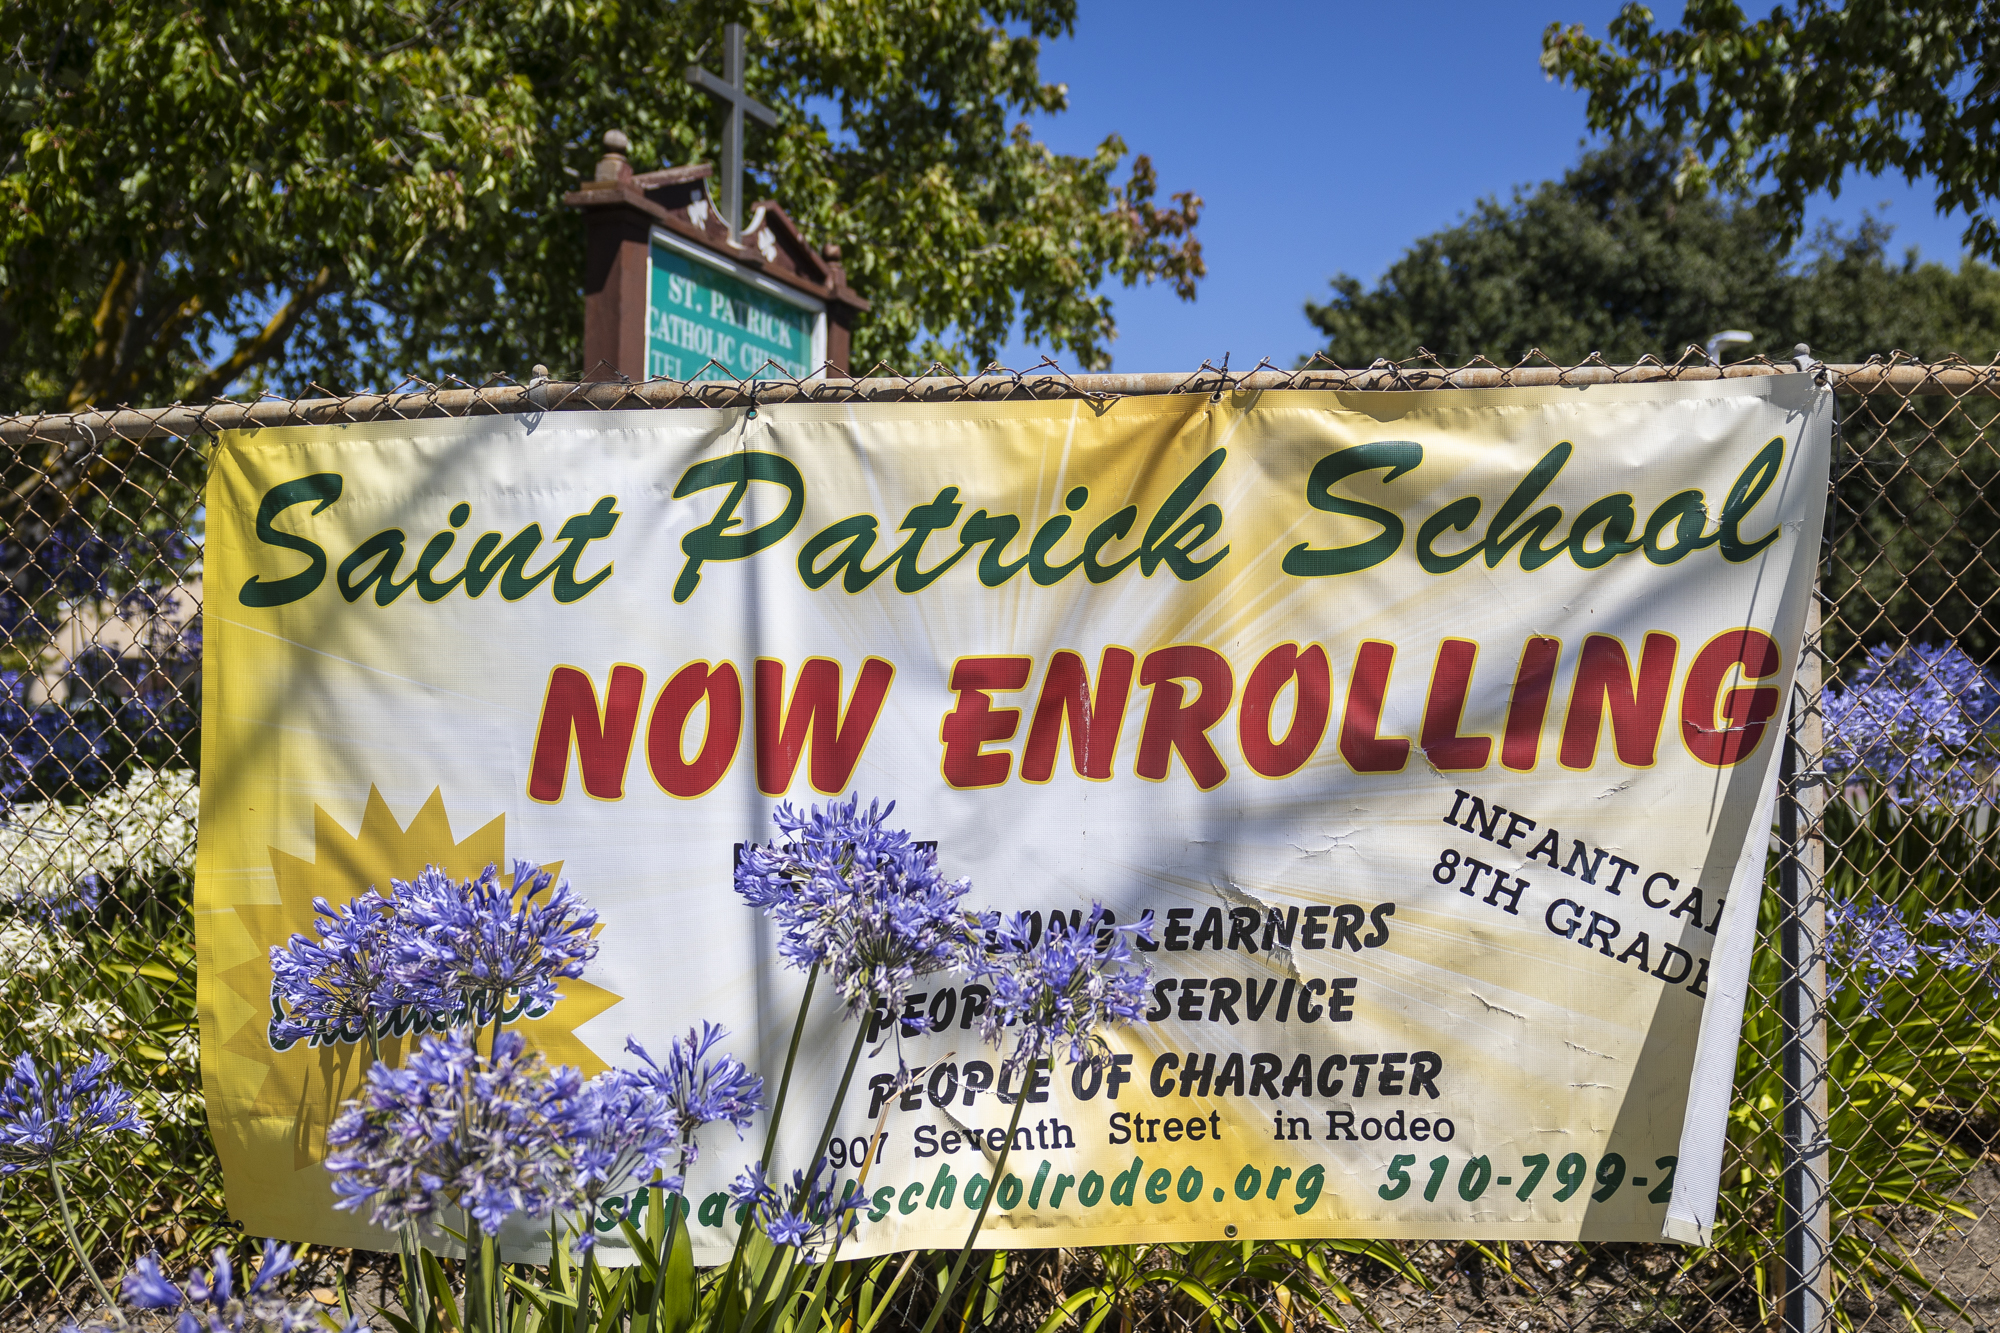 A brightly colored sign hanging on a chain link fence that reads "Saint Patrick School Now Enrolling."